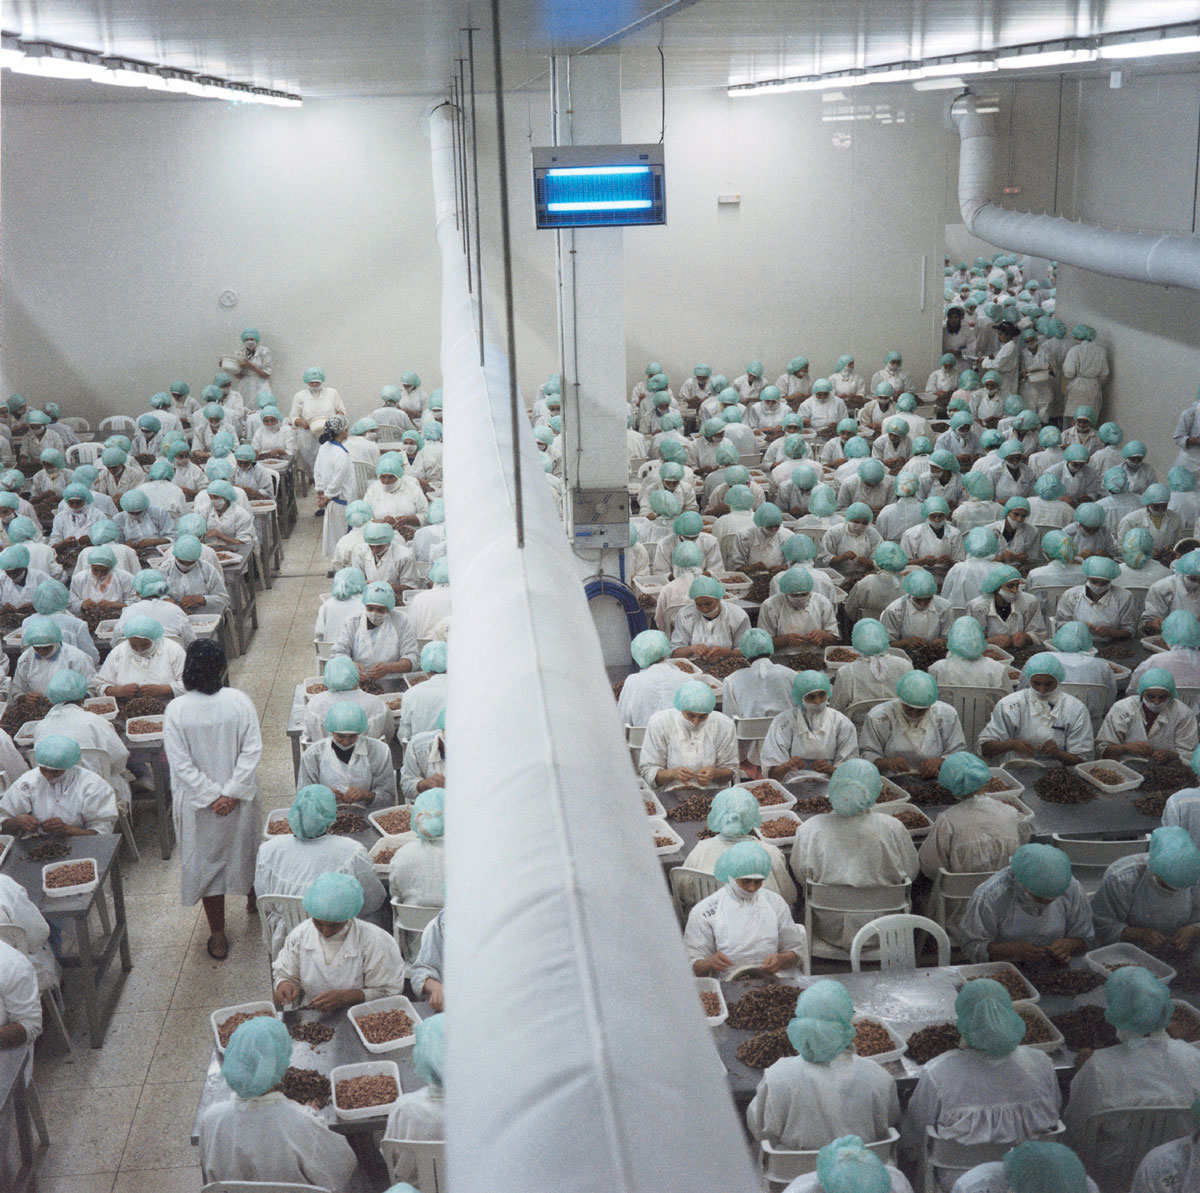 Artist Yto Barrada's 1998 photograph of factory workers in Tangier peeling shrimp, titled 